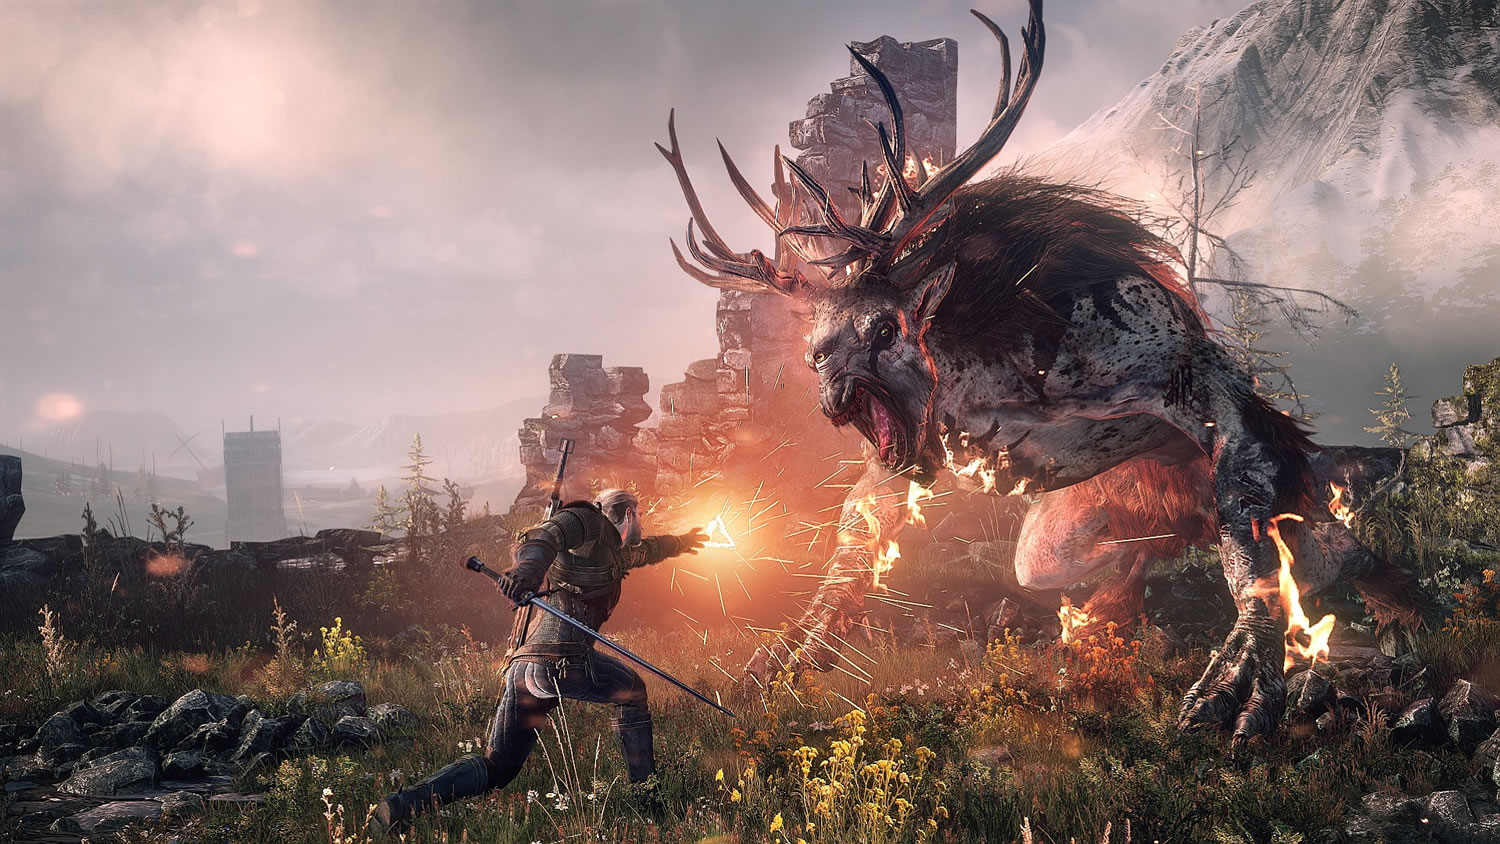 CD Projekt RED
&quot;The Witcher 3: Wild Hunt&quot; offers an epic quest.